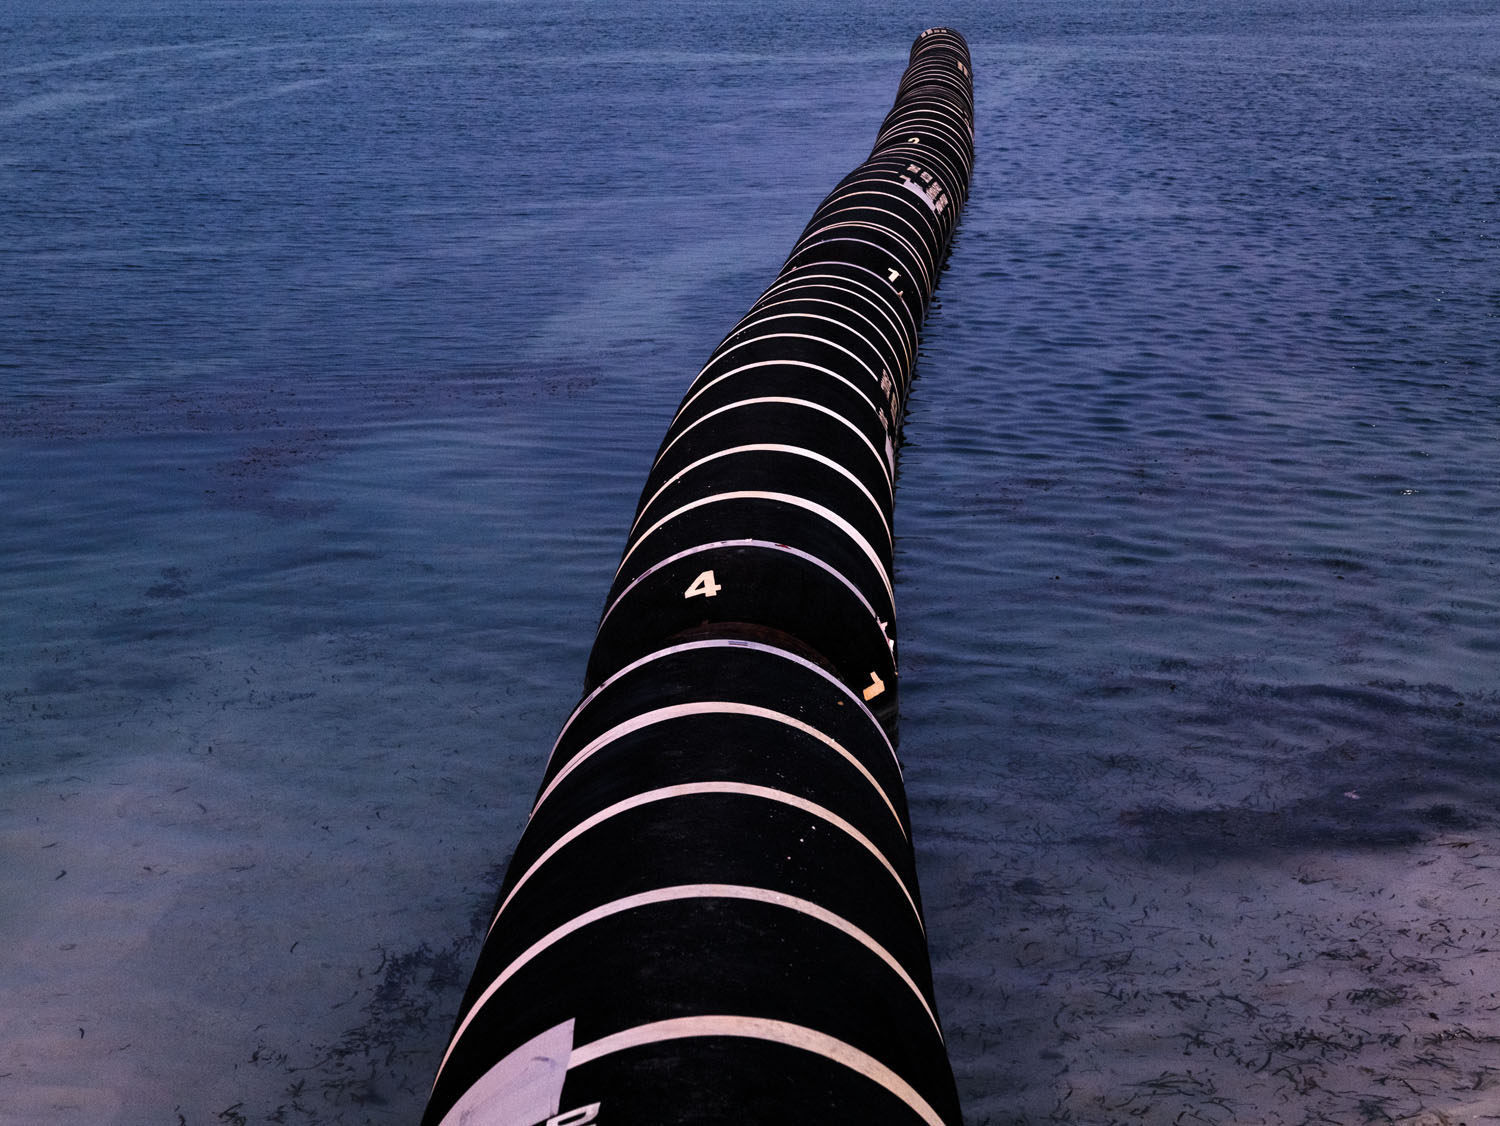 Dredge pipe for an airport runway project on Muli island.